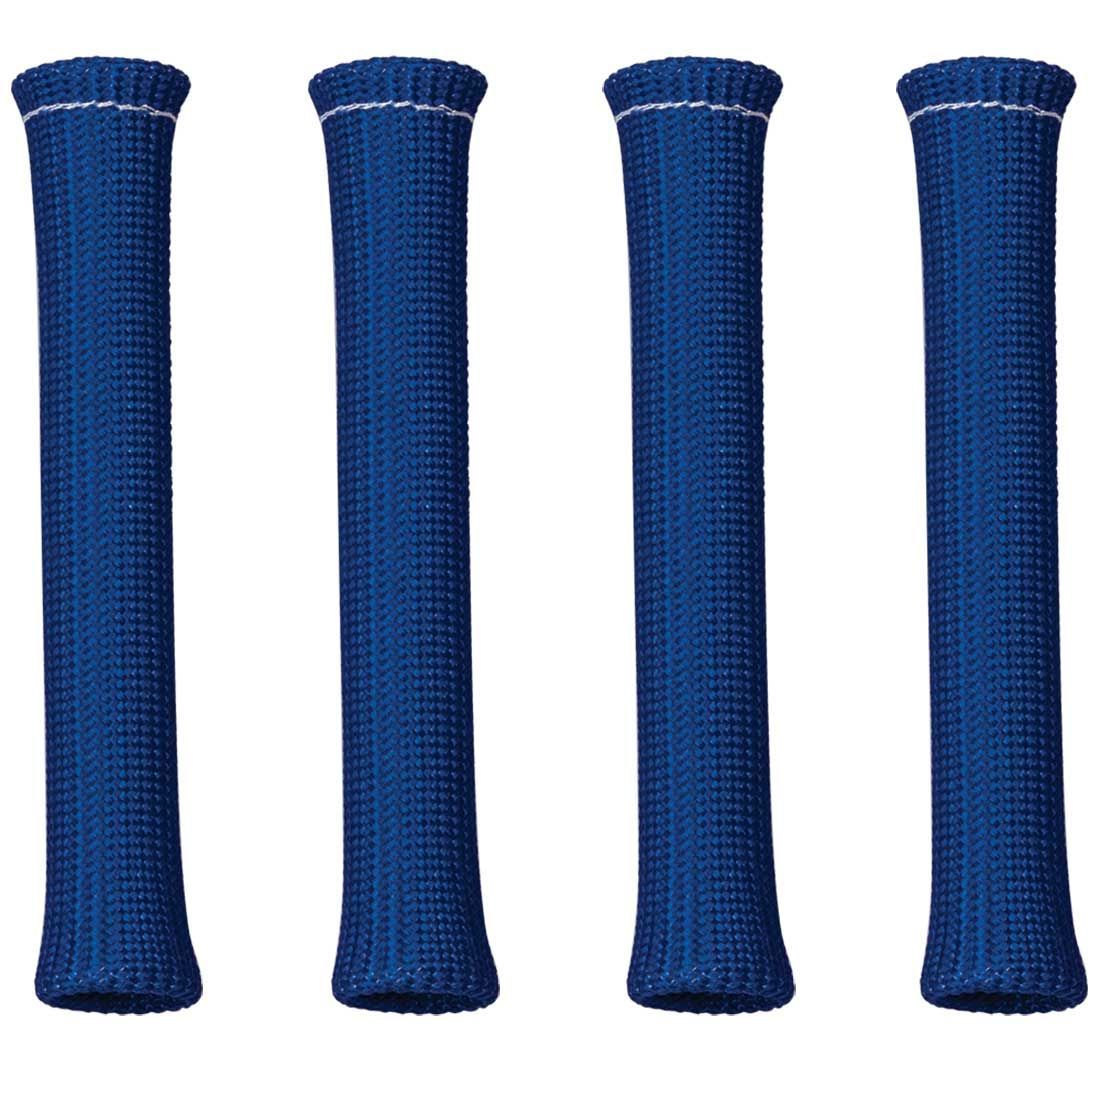 Moroso 71974 Spark Plug Boot Sleeve, 3/4 in ID, 7-1/2 in Long, High Temperature, Braided Fiberglass, Blue, Set of 4